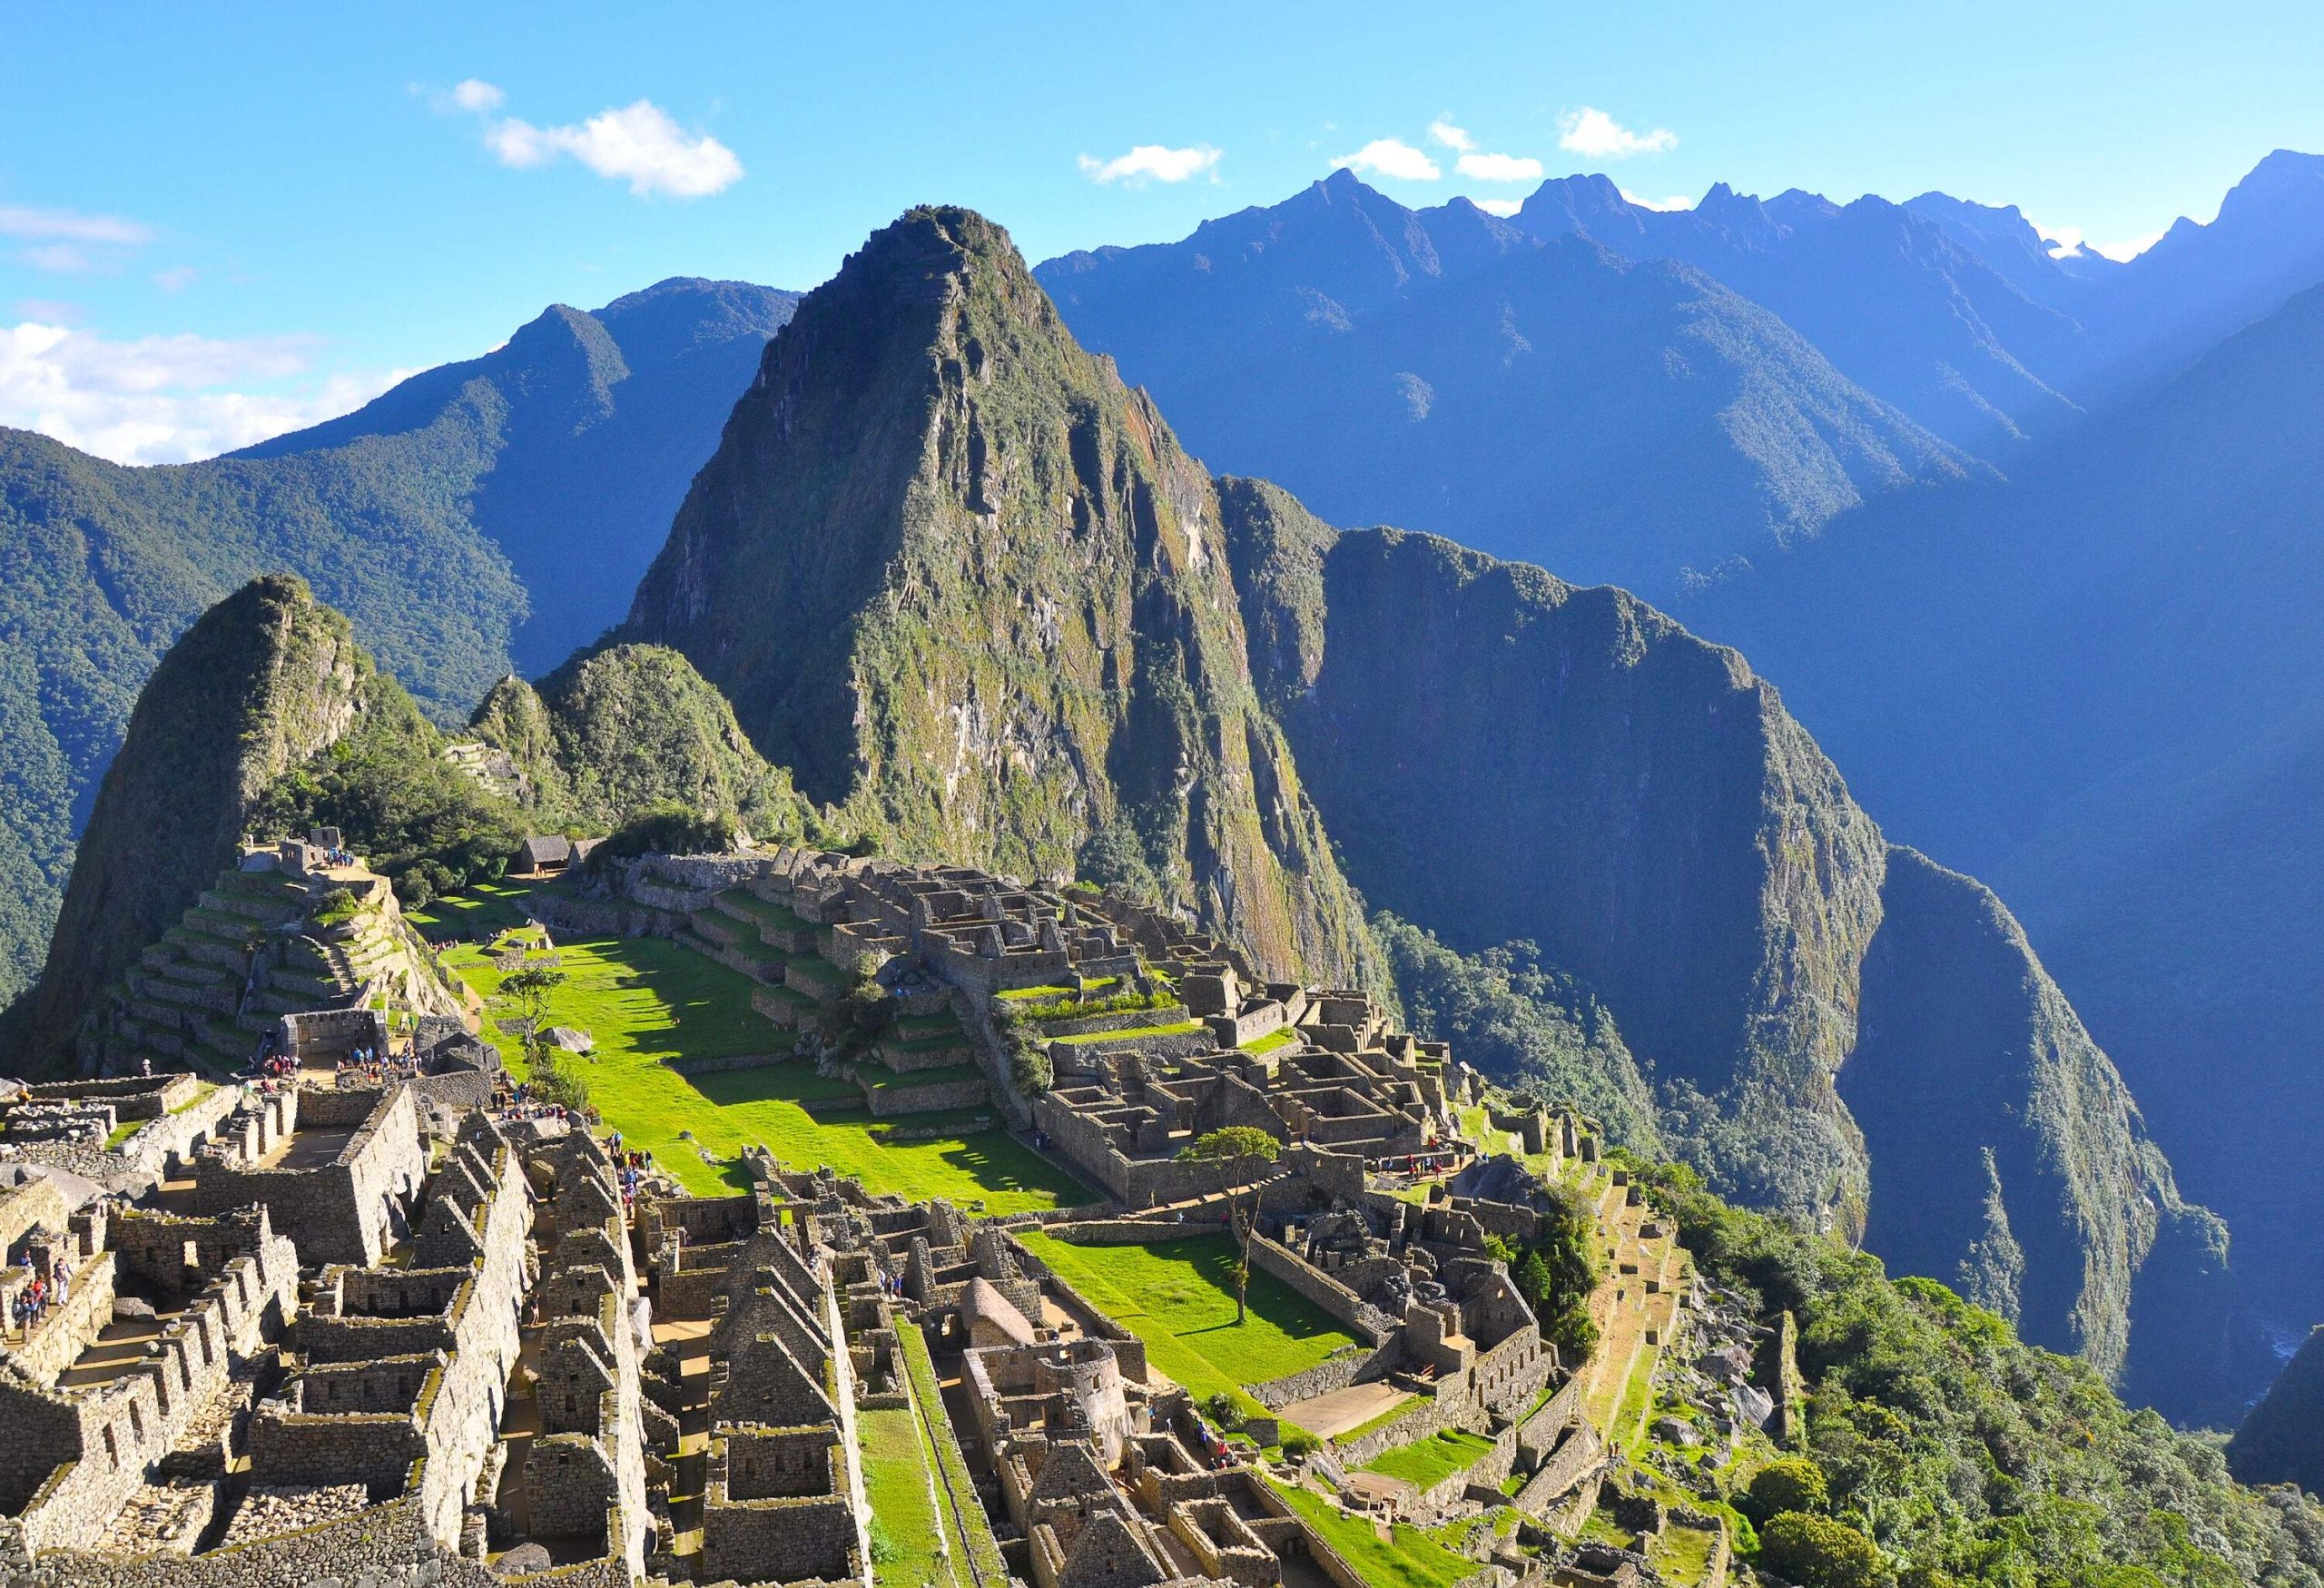 Terraced ruins of Machu Picchu, an ancient hilltop city beside mountains with rugged peaks.